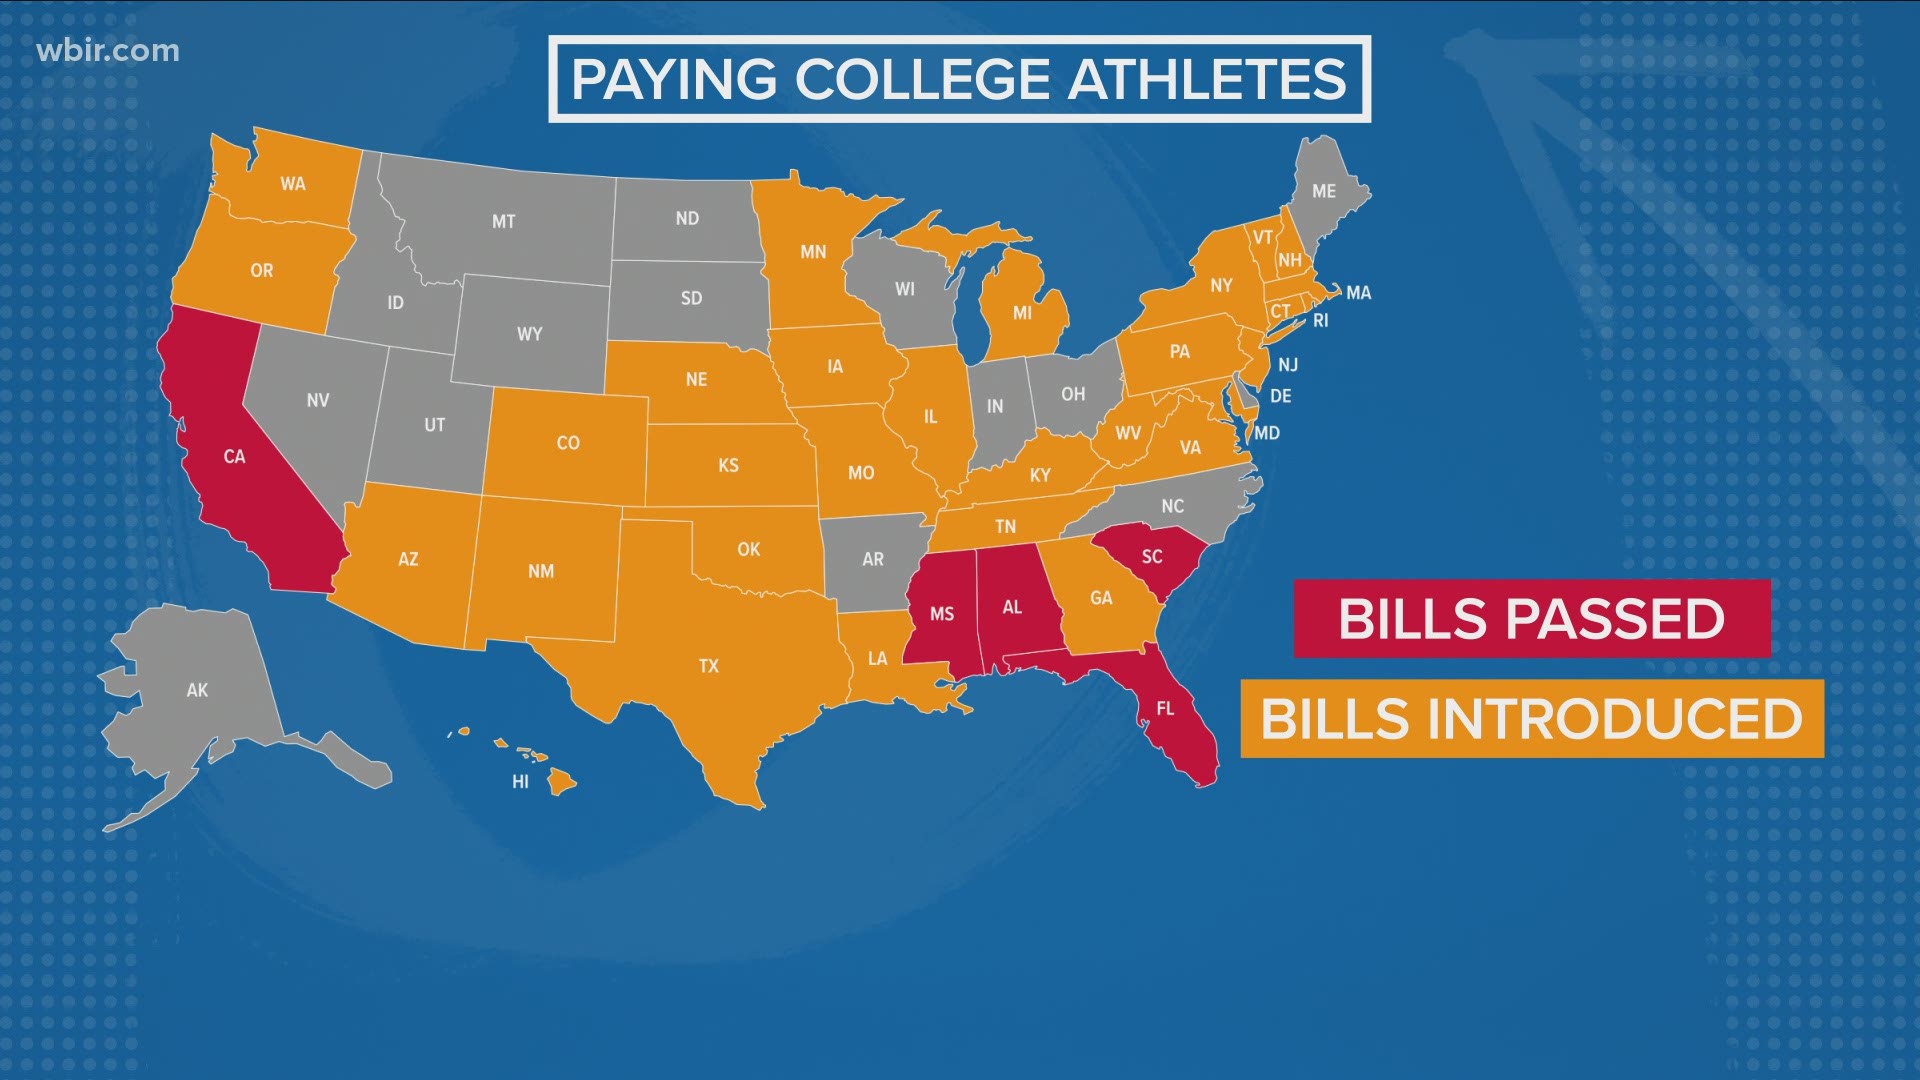 The bill would allow college athletes in Tennessee to profit from their name, image and likeness.